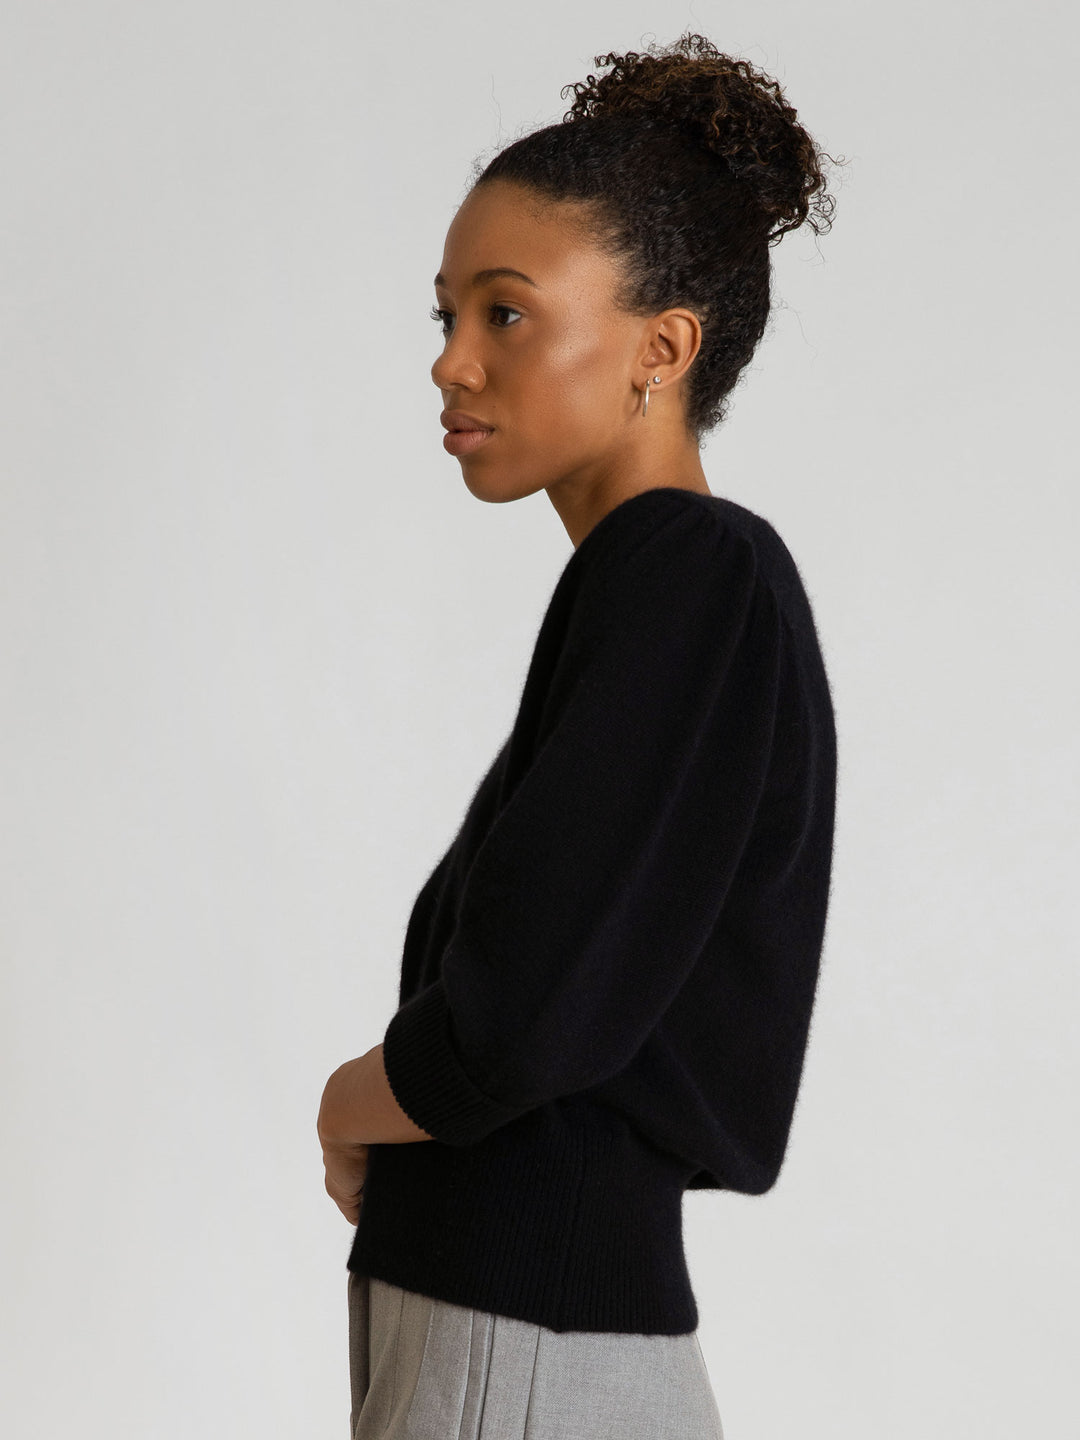 Cashmere sweater "Swan". Puff sleeve, 100% pure cashmere from Kashmina. Color: black